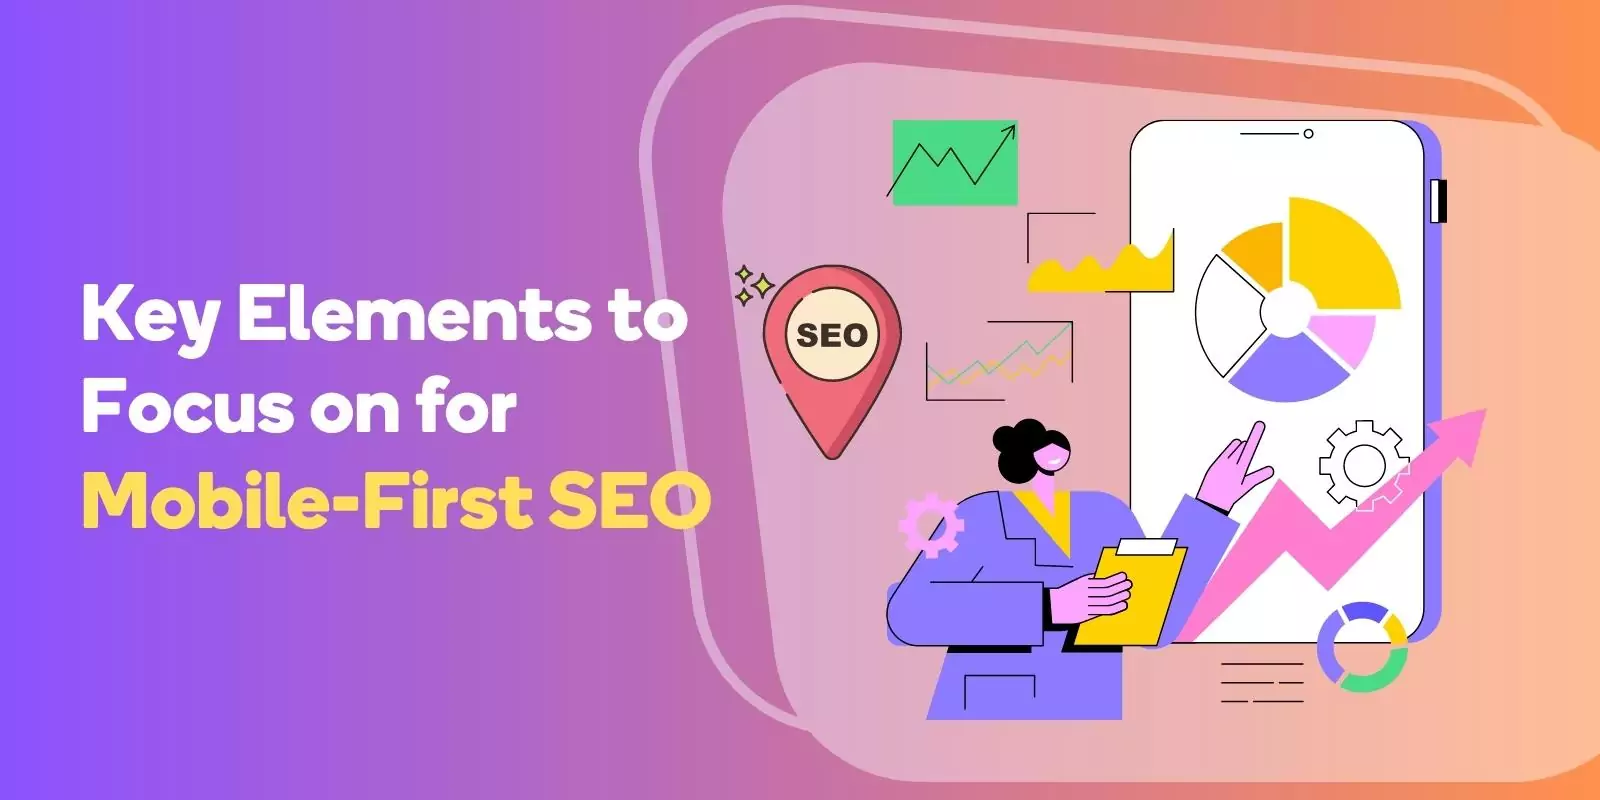 Key Elements to Focus on for Mobile-First SEO